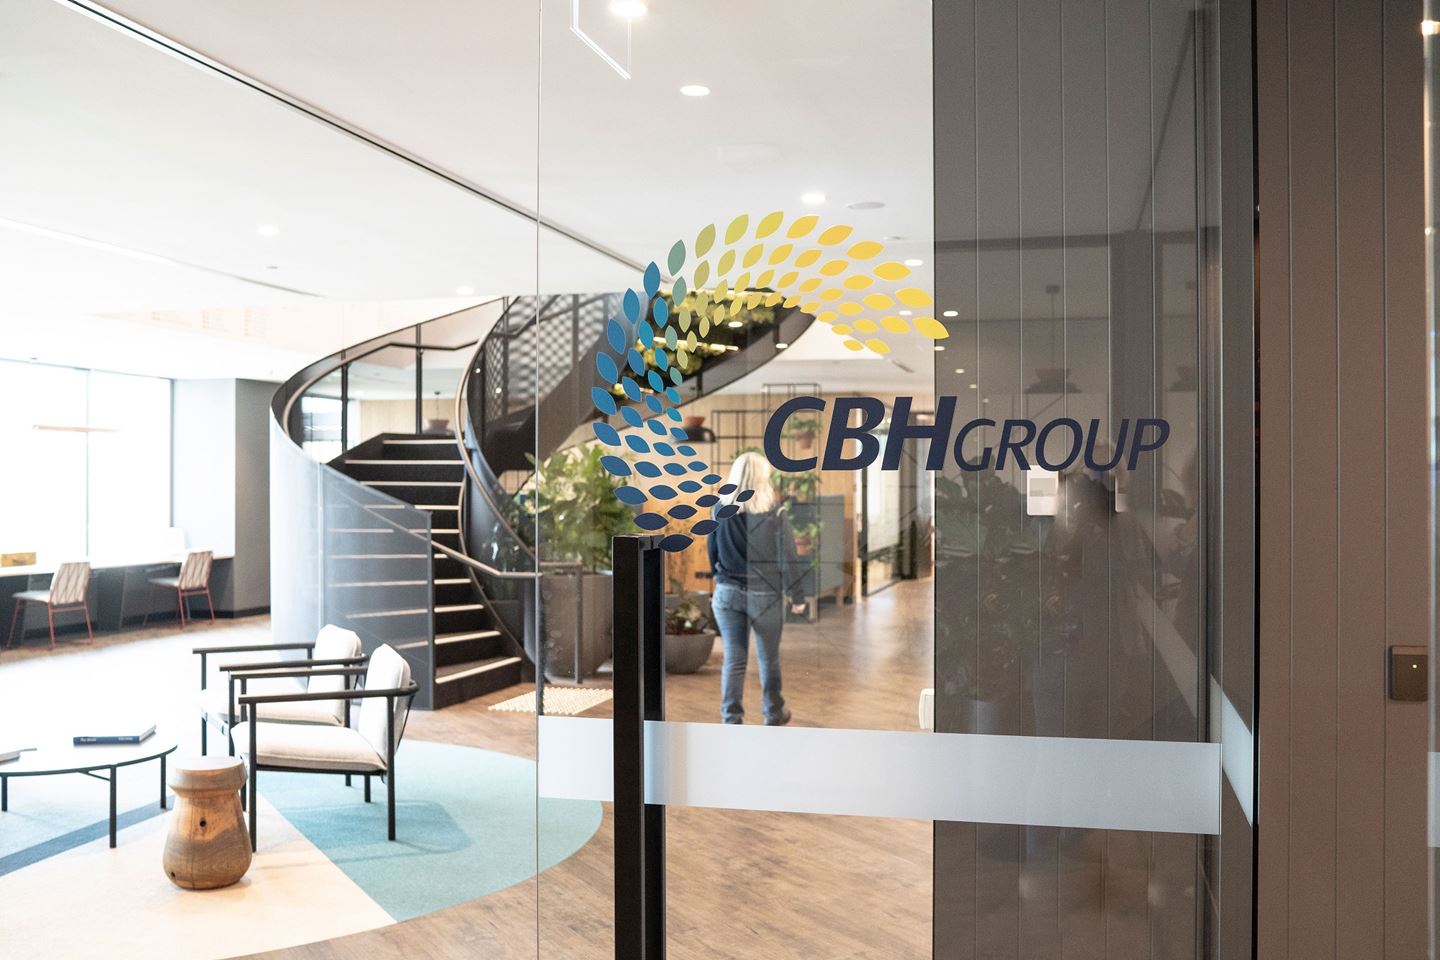 A glass door with the CBH Group logo shows the reception area and spiral staircase of CBH Head Office behind it